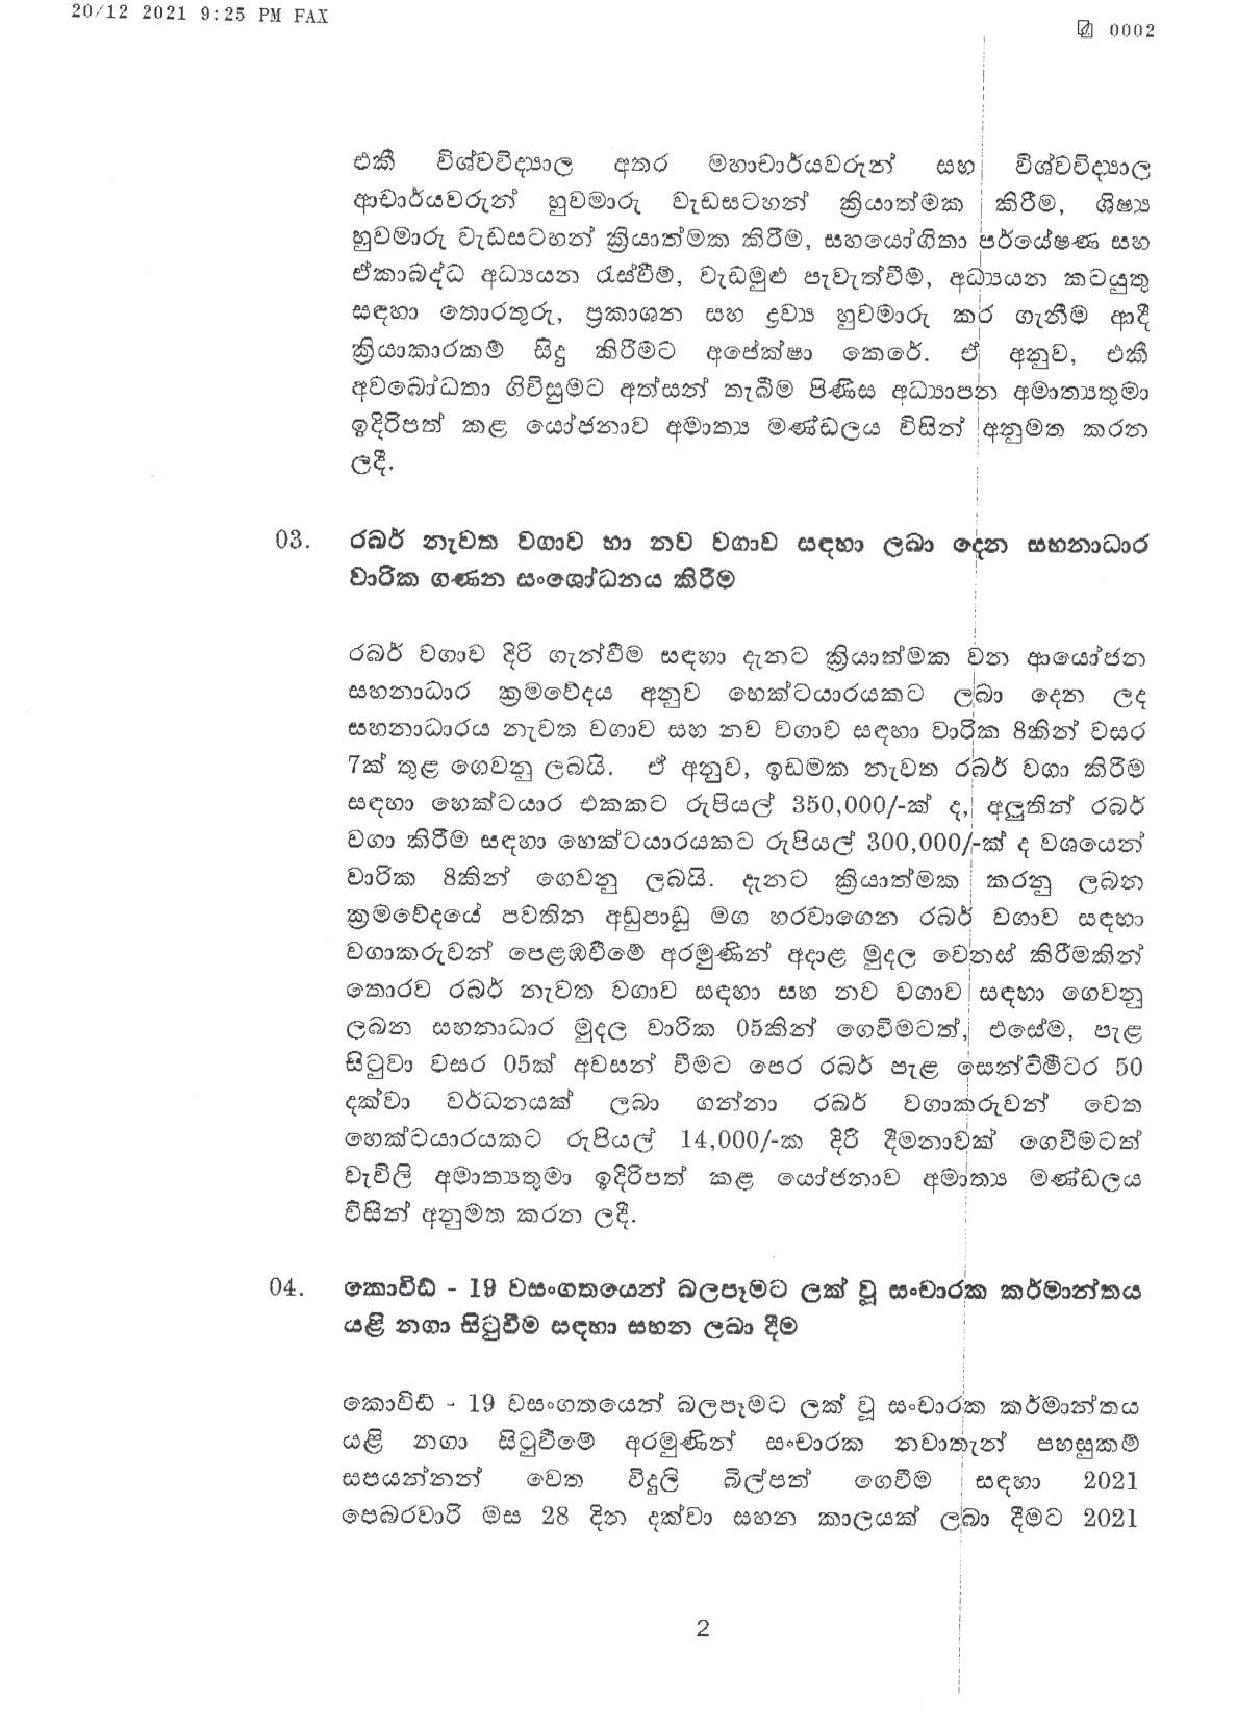 Cabinet Decisions on 20.12.2021 page 002